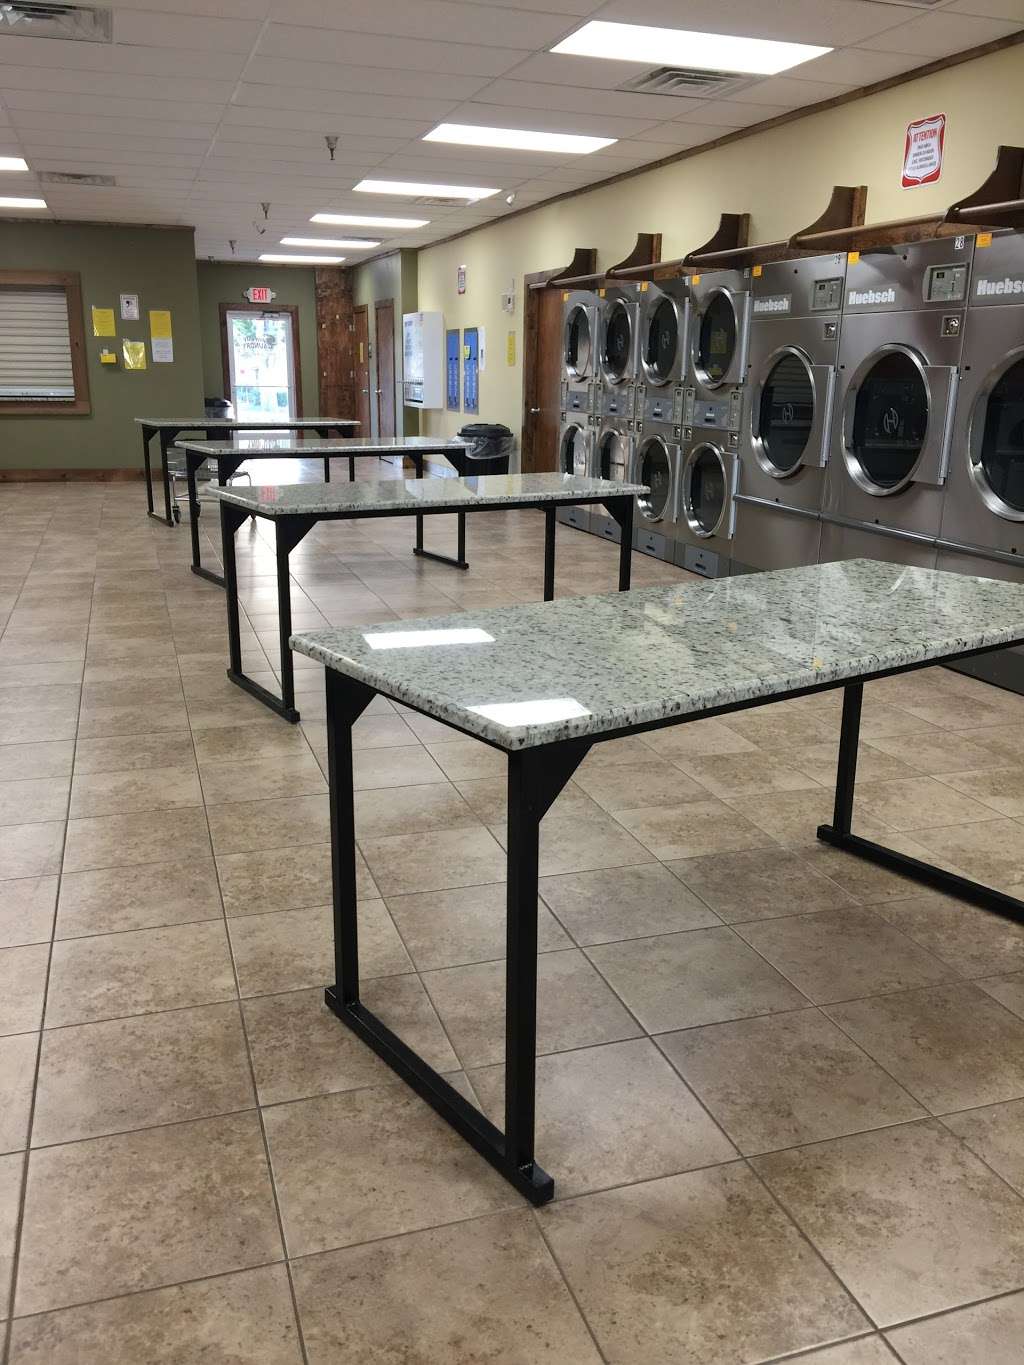 Spin City Laundry | 320 W Ardice Ave, Eustis, FL 32726, USA | Phone: (866) 352-9274 ext. 206